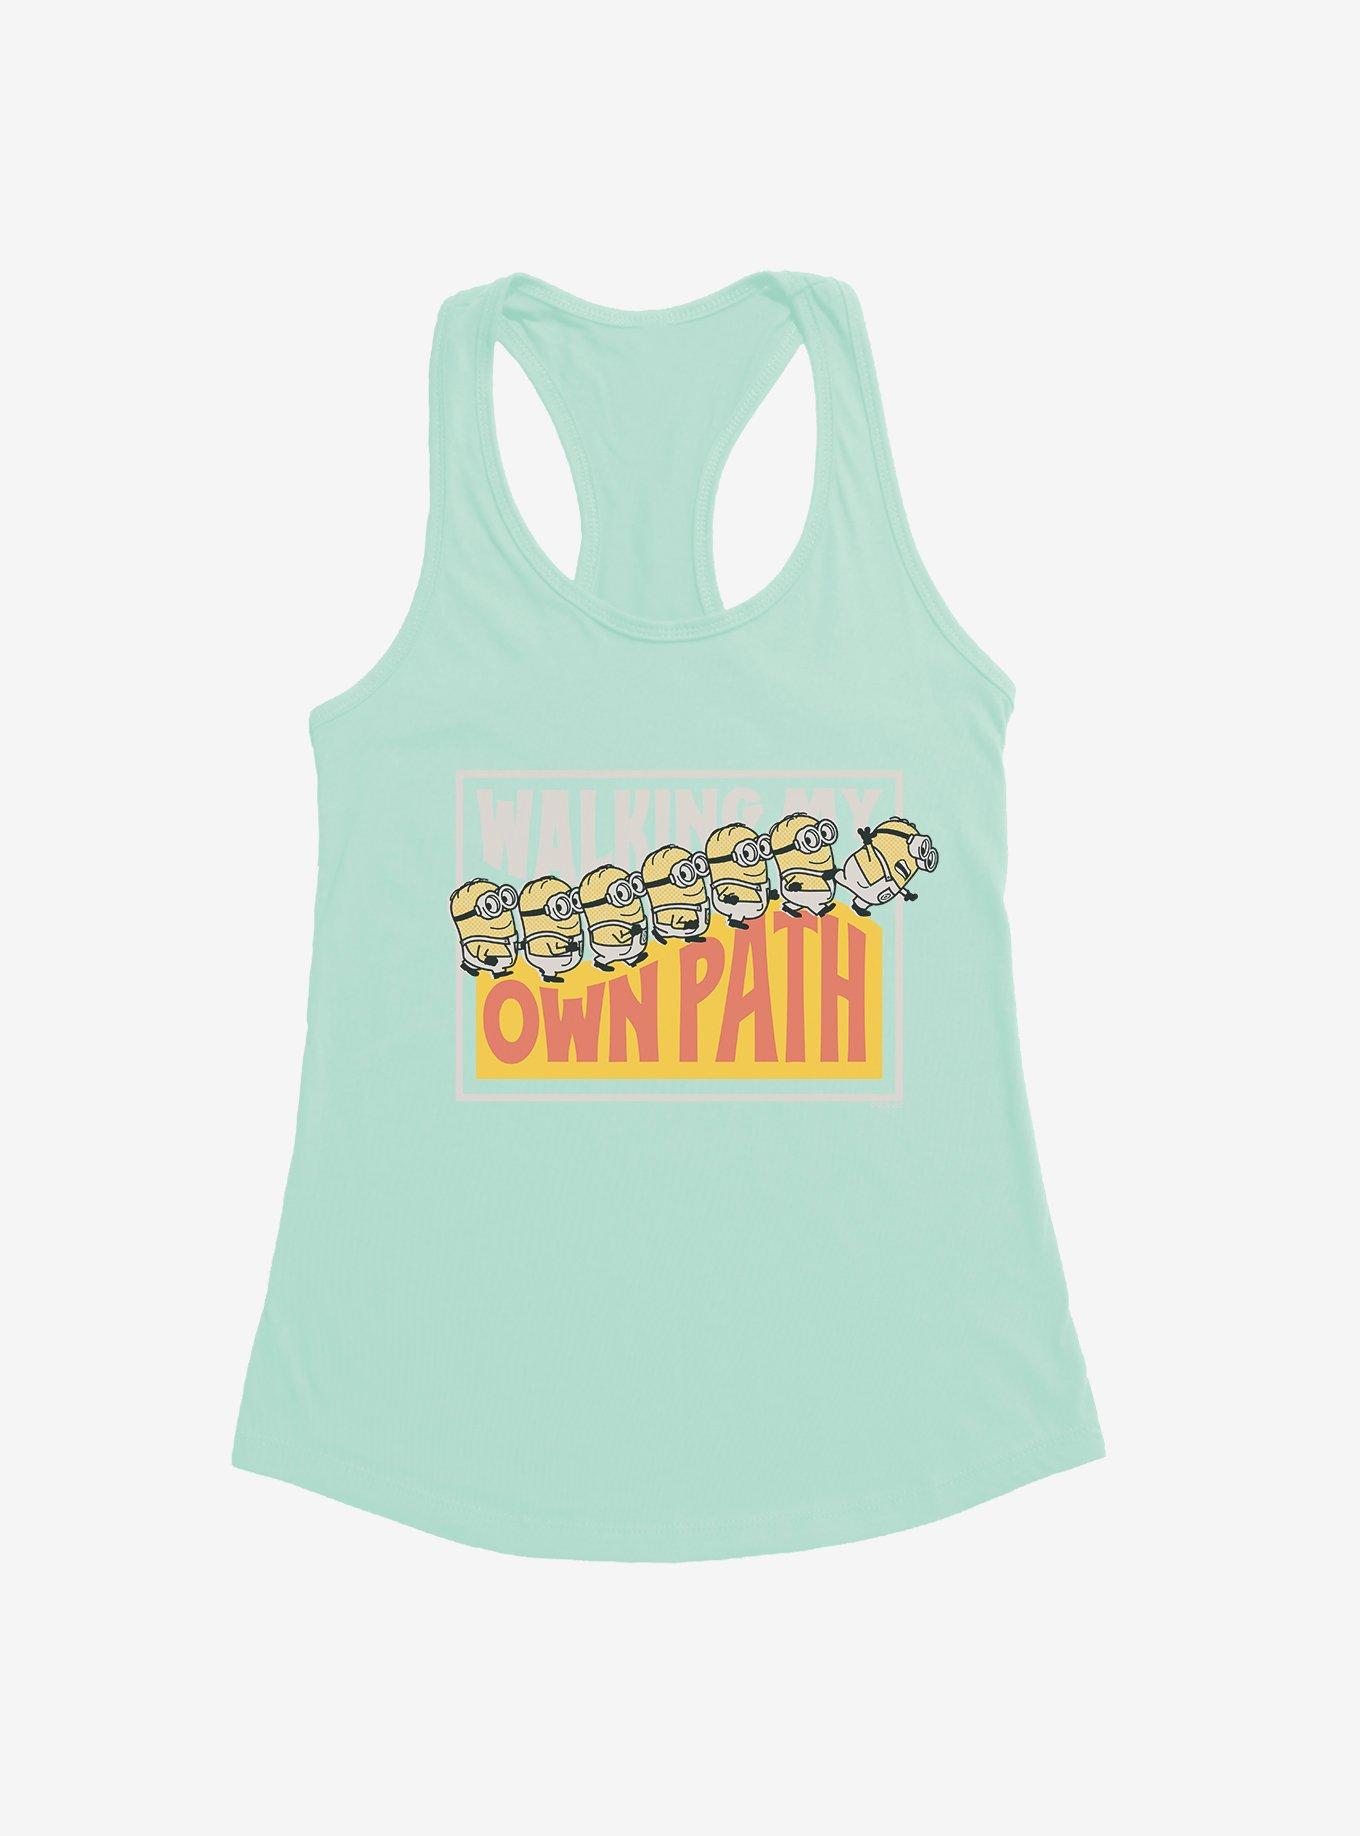 Minions On My Own Path Panel Womens Tank Top, MINT, hi-res